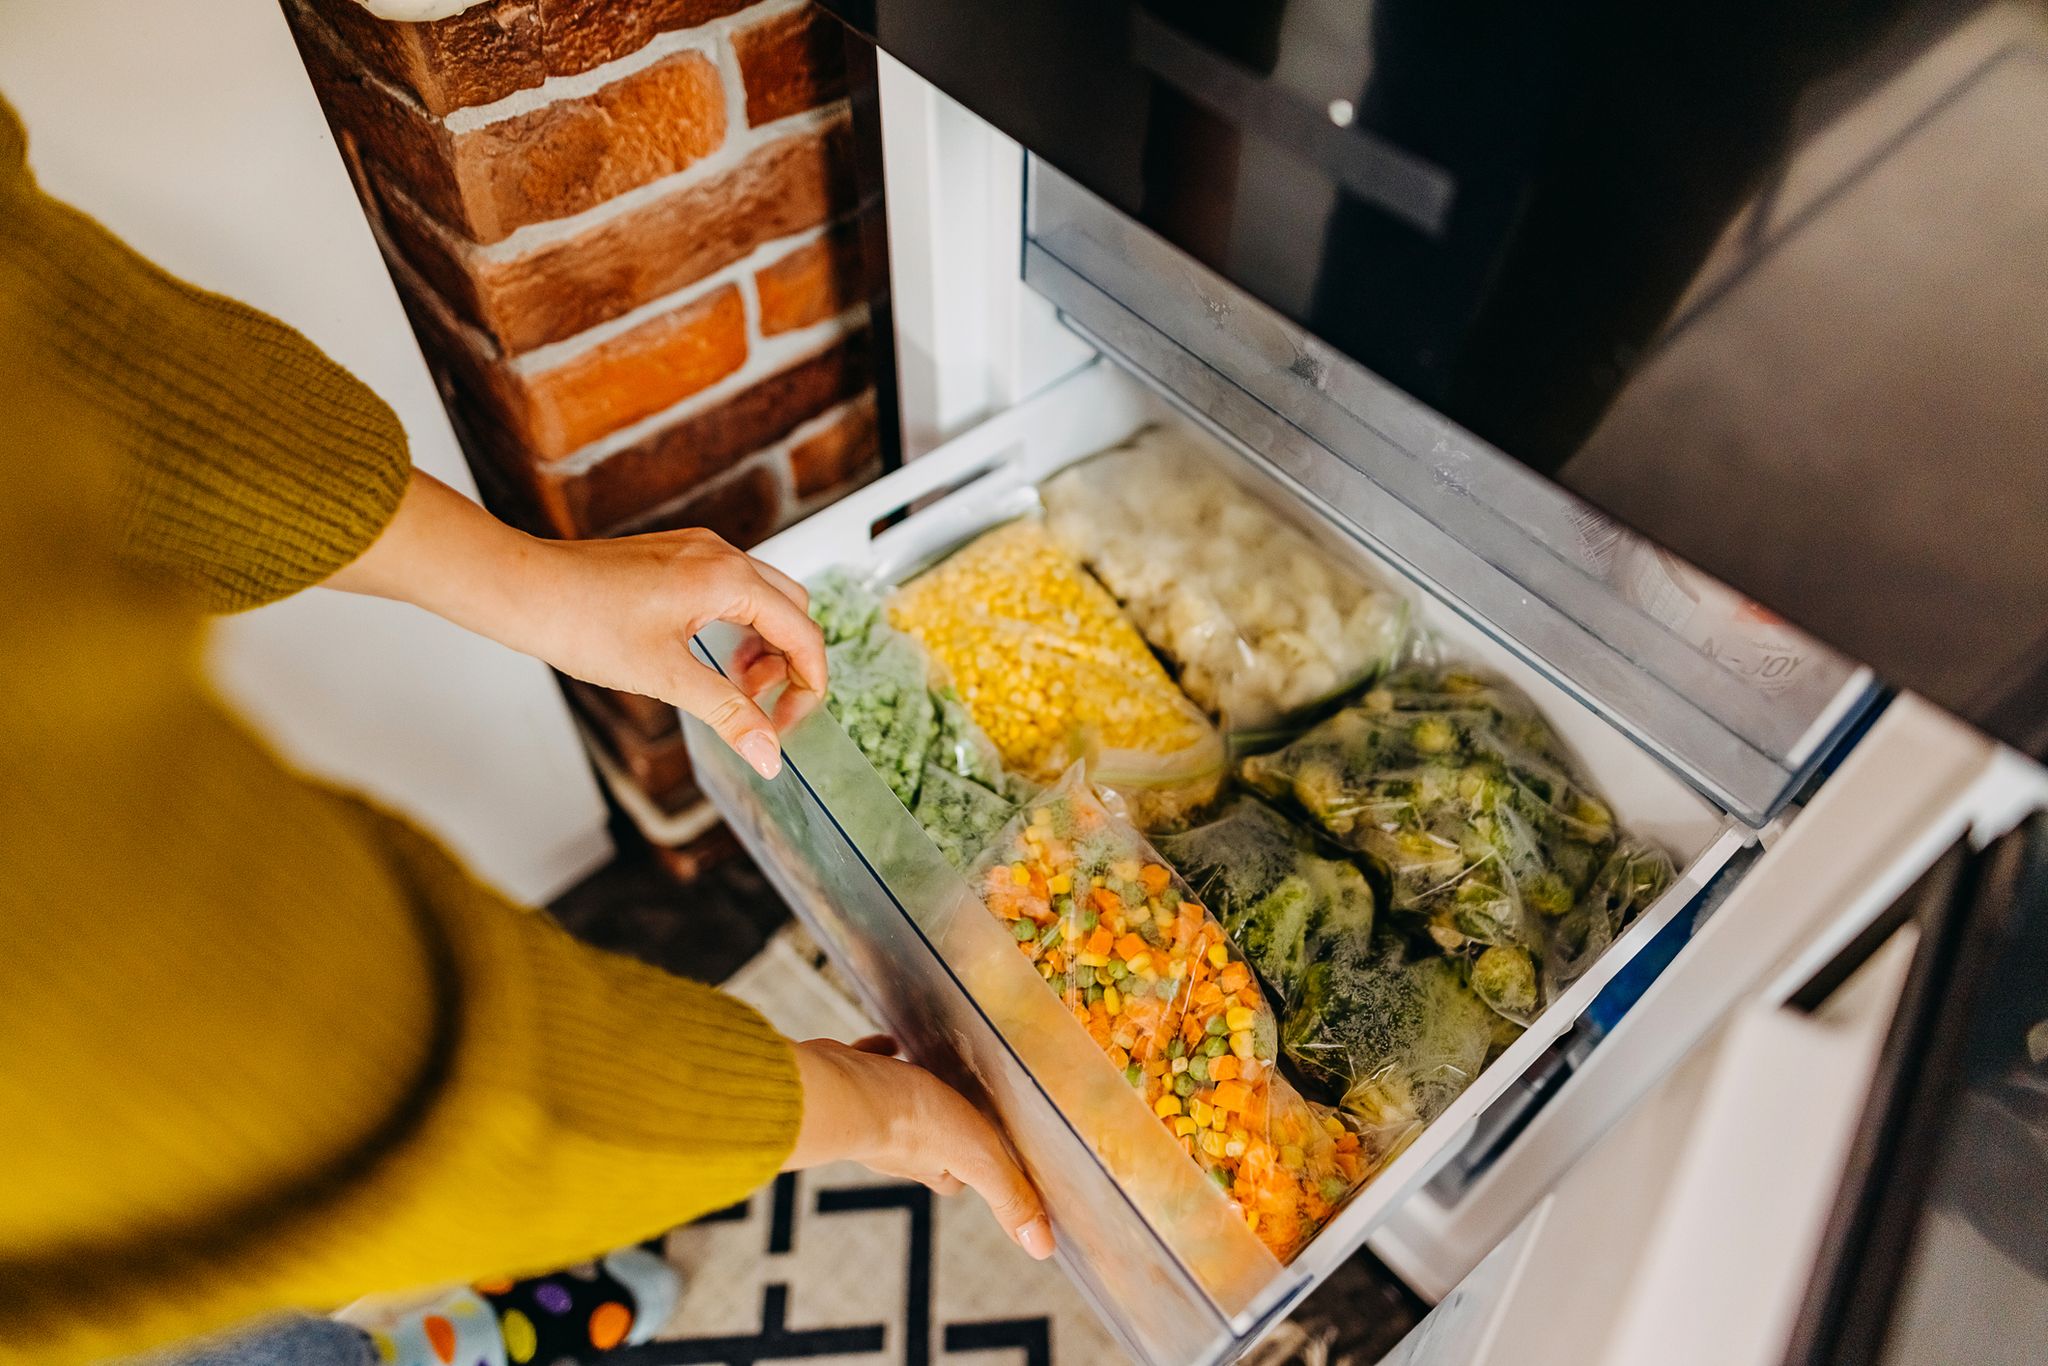 Expert Tips for Freezing Food and Reducing Food Waste